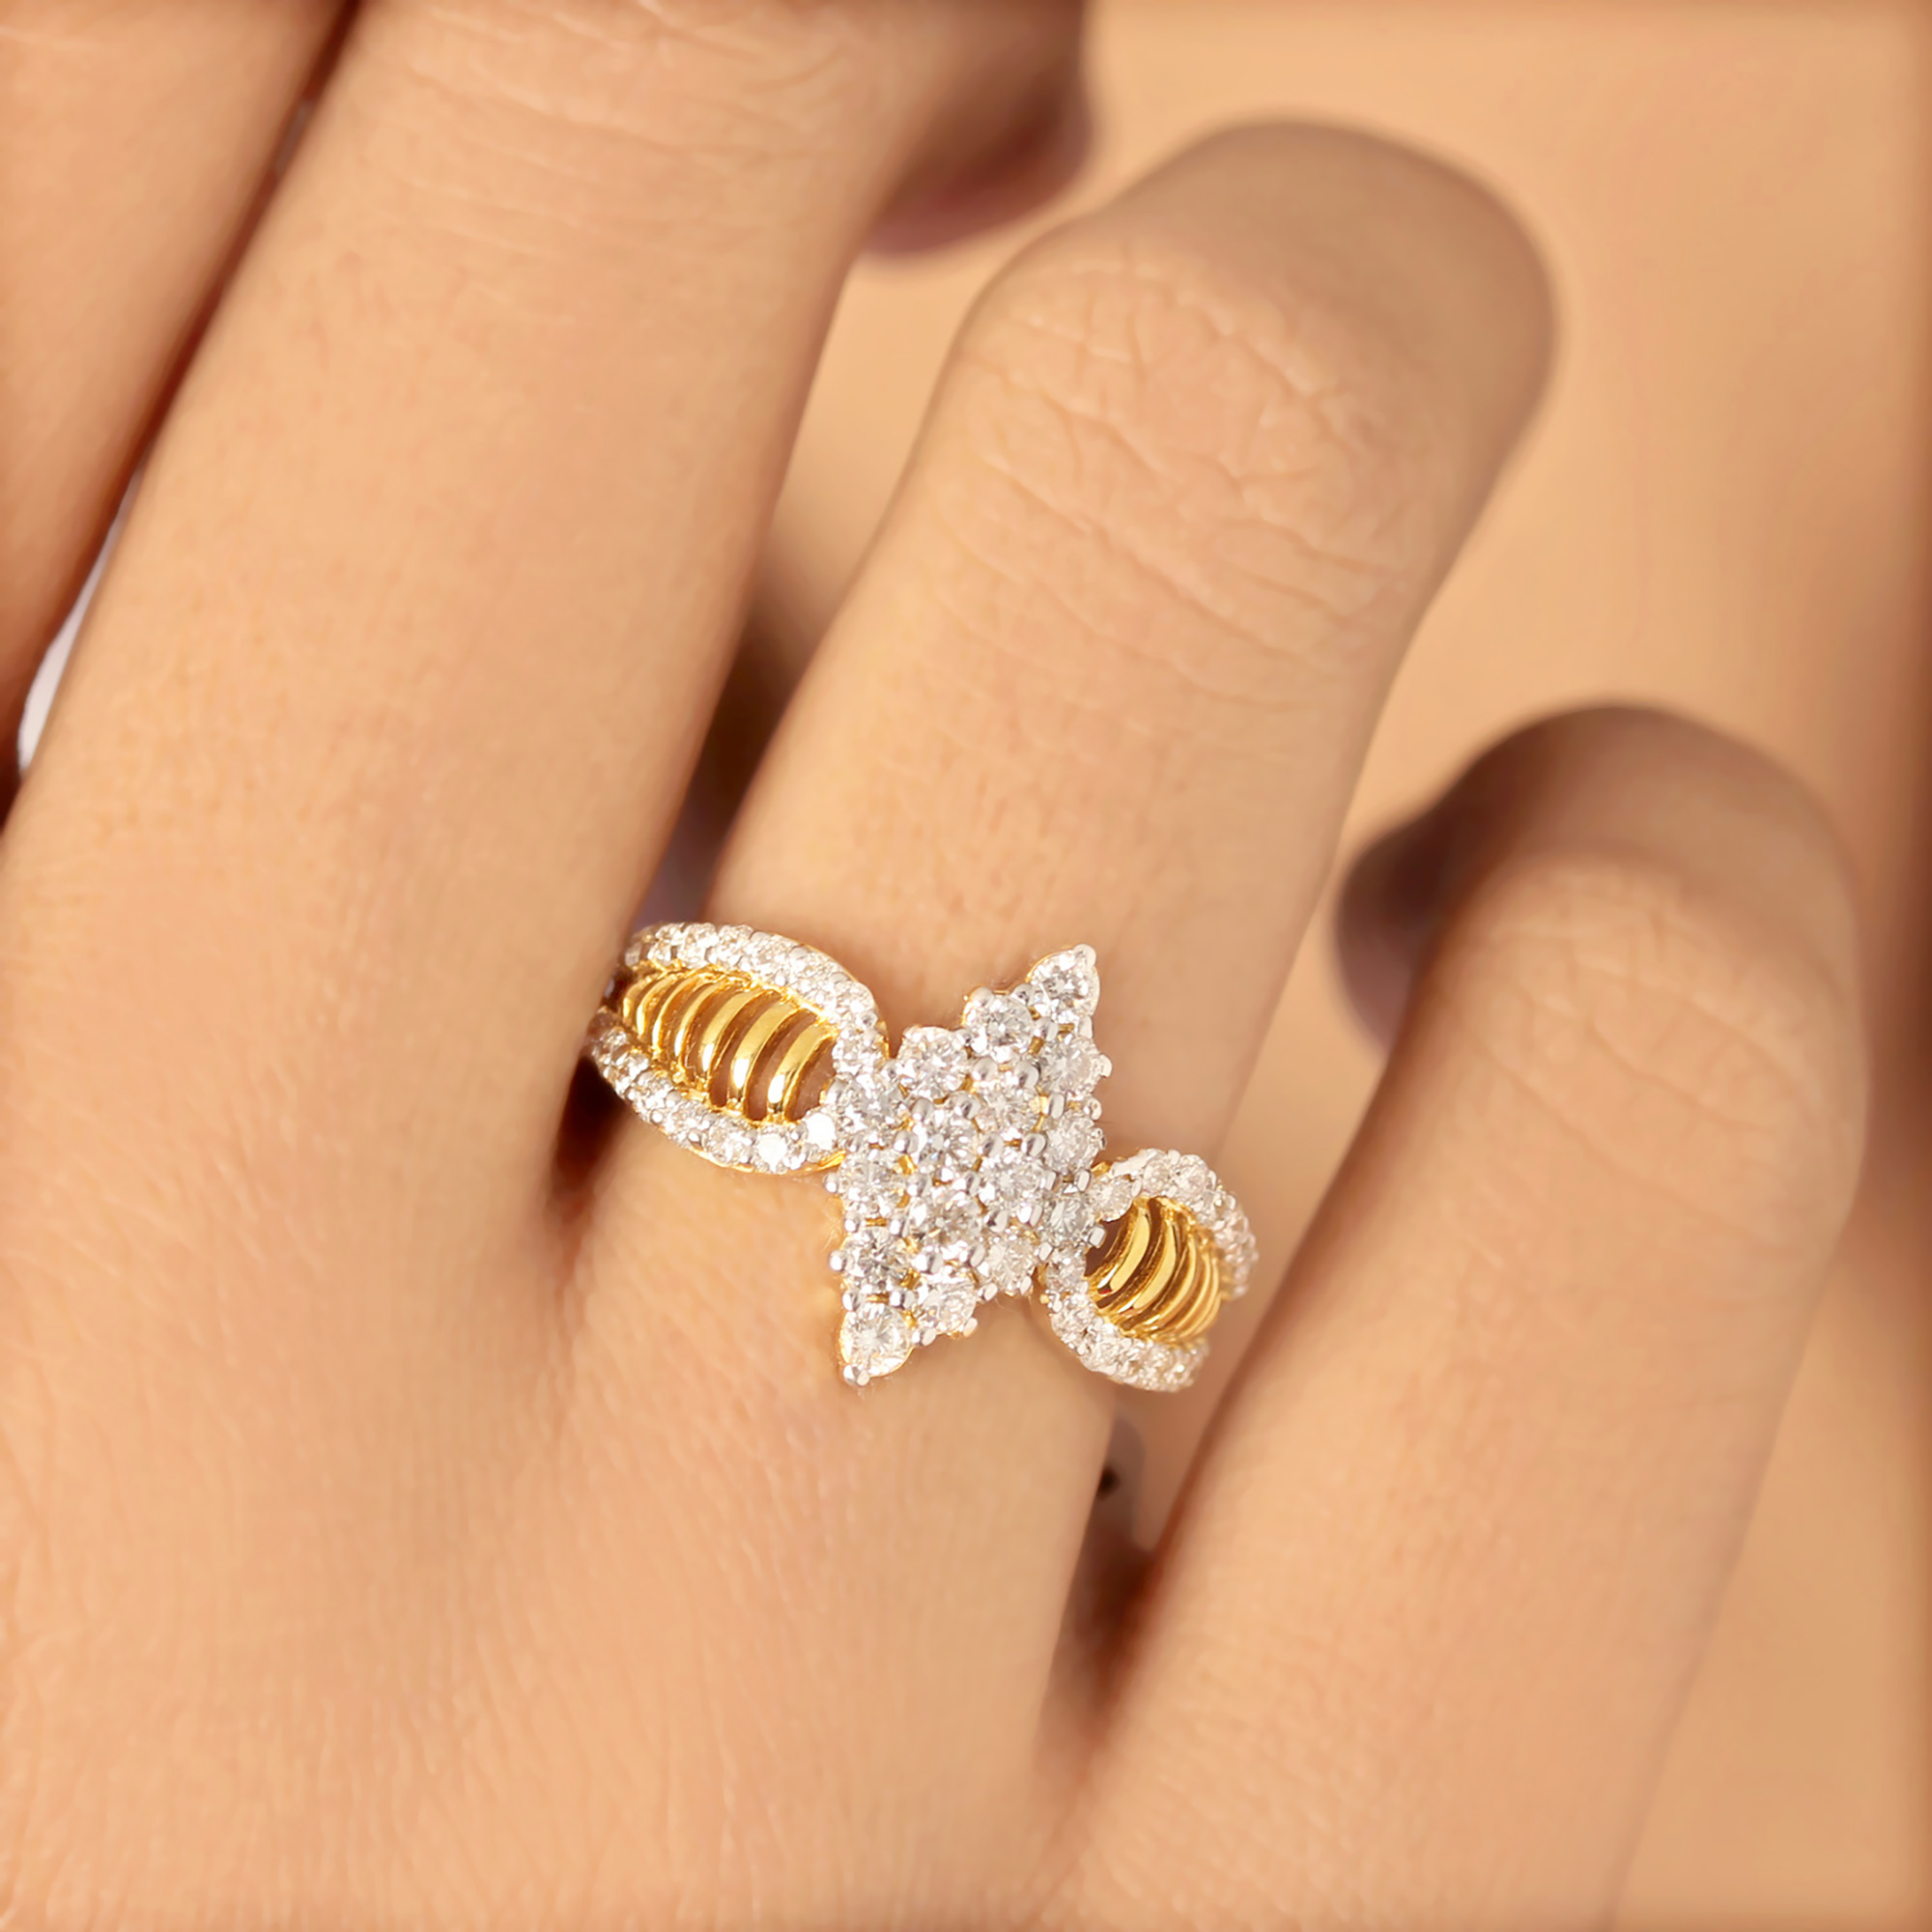 Real Diamond In Yellow Gold Ring